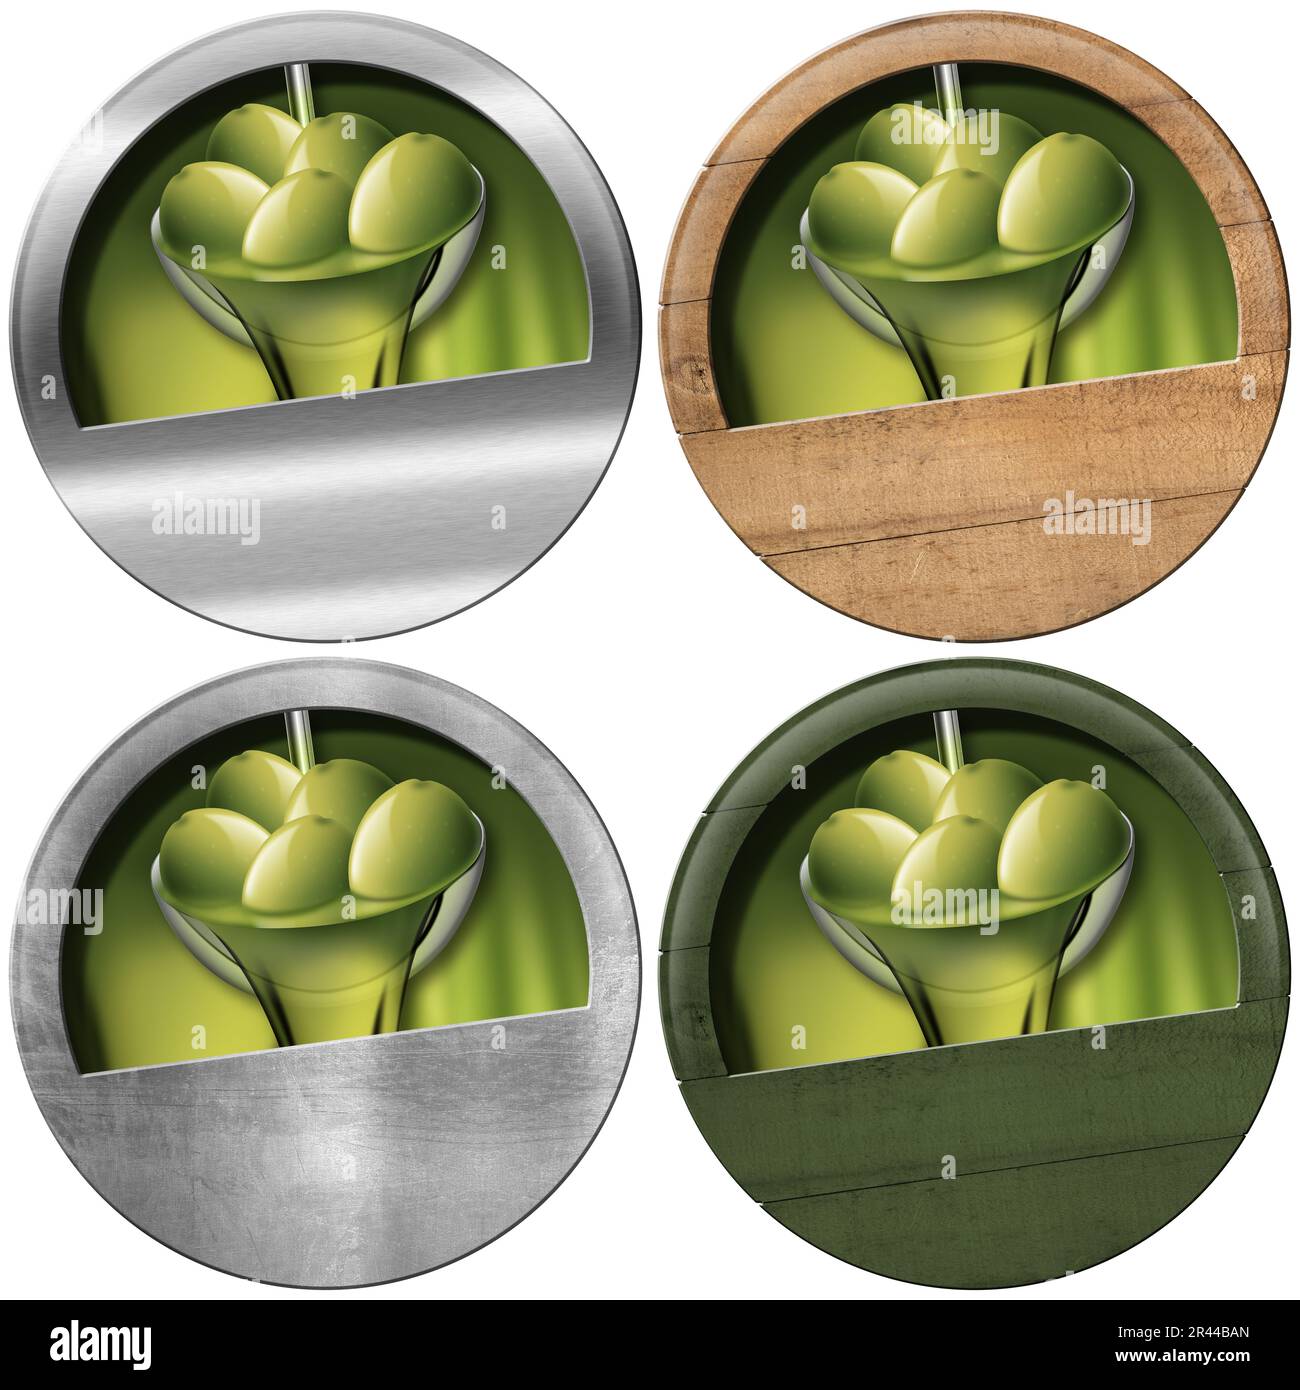 Collection of wooden and metallic round signs with green olives, olive oil and copy space. Isolated on white background, 3D illustration and Photo. Stock Photo